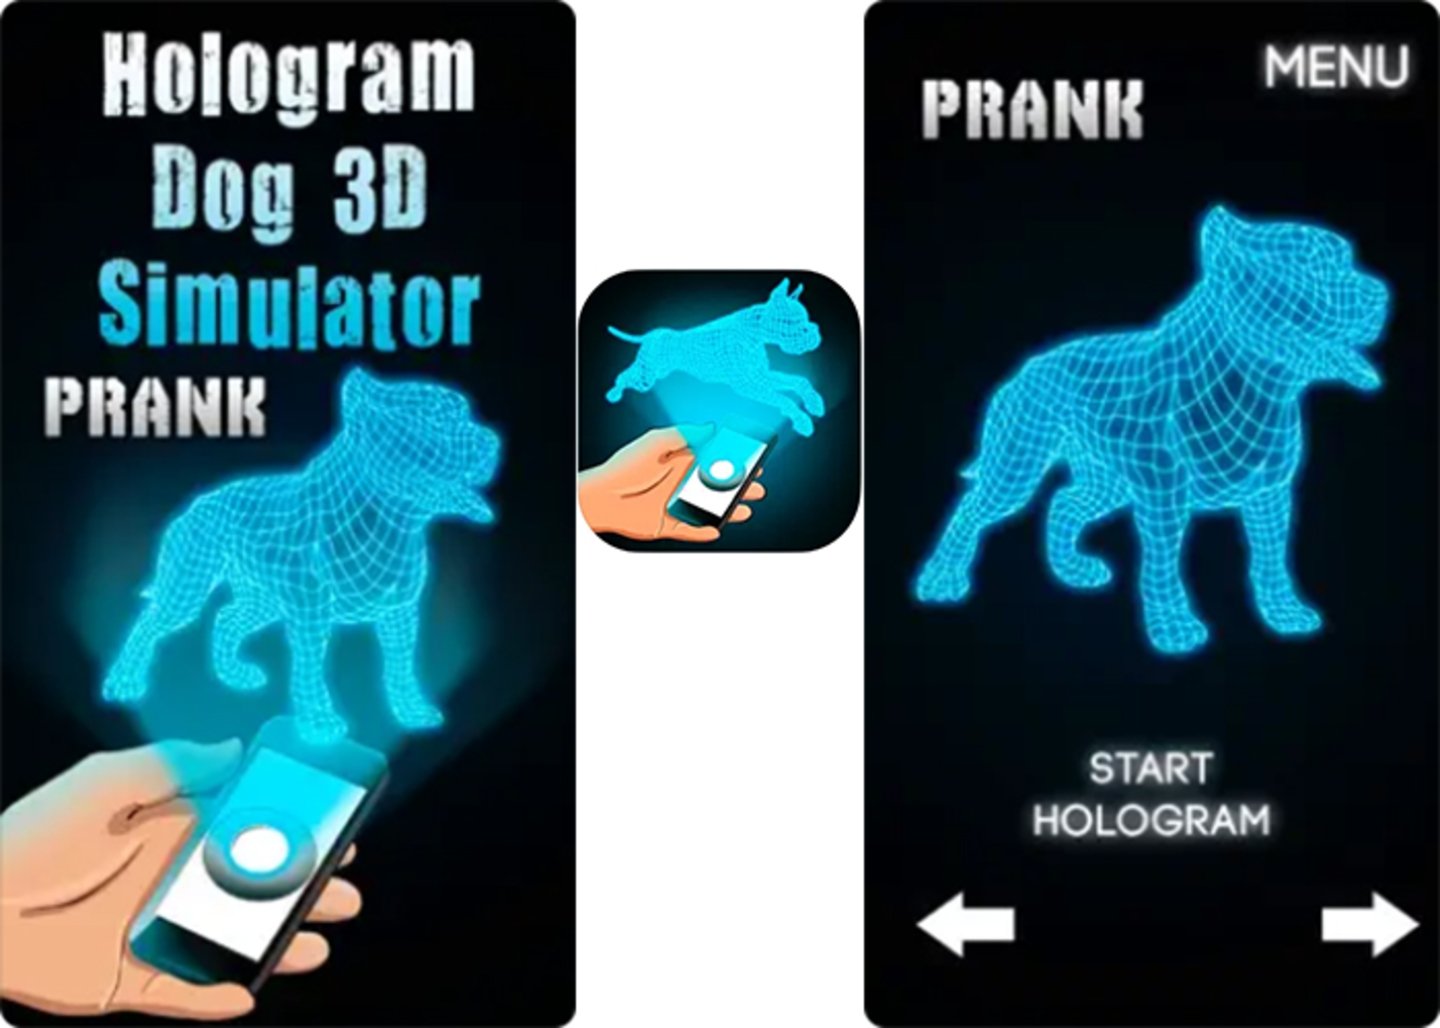 Play with a 3D virtual dog with Hologram Dog Simulator